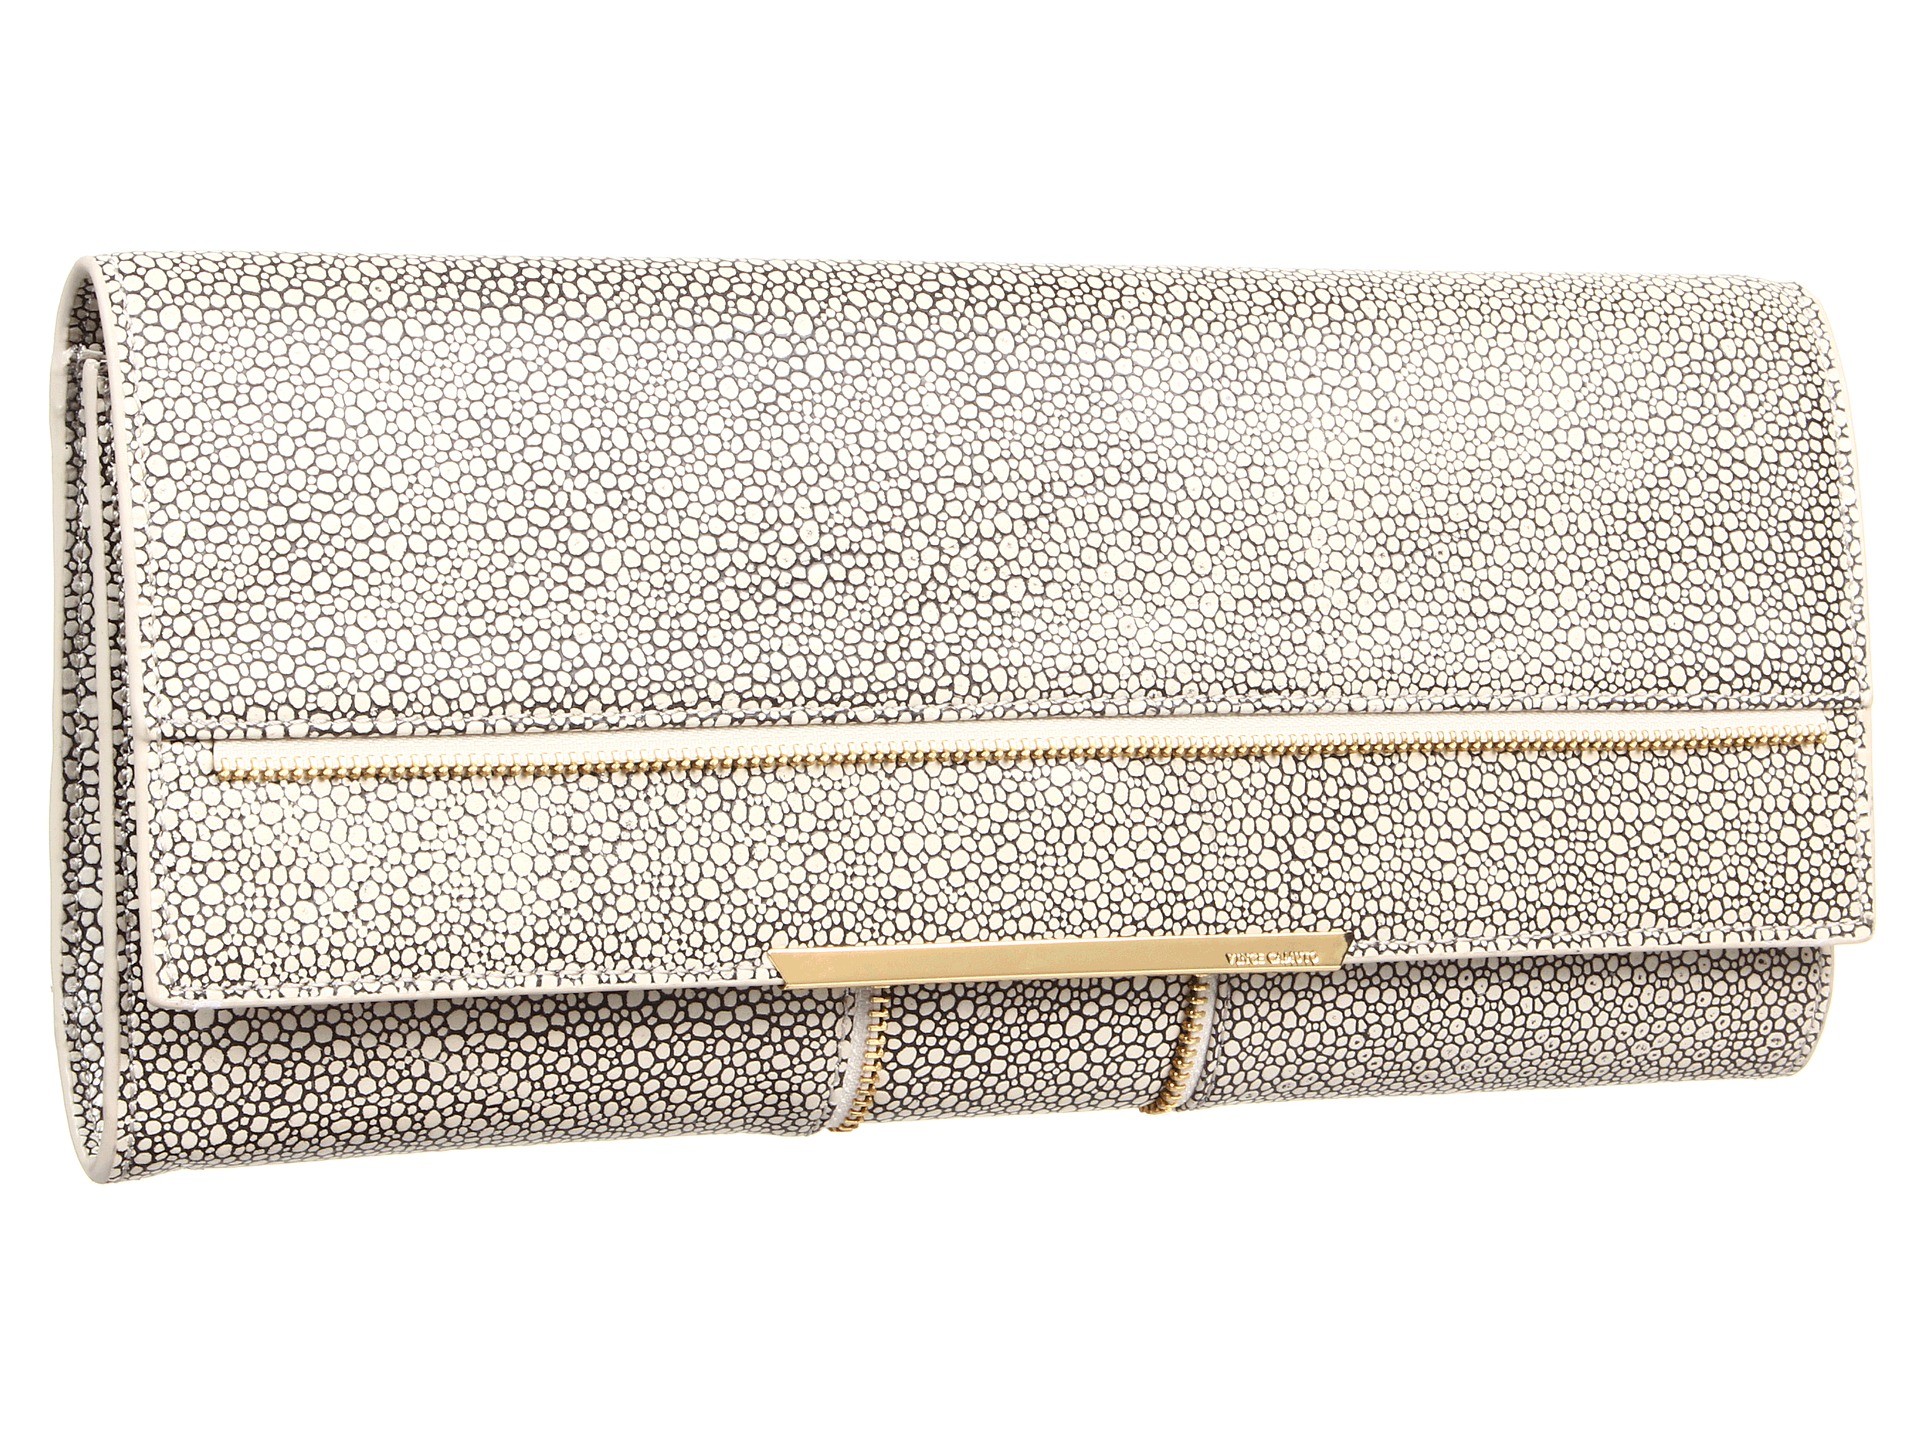 Vince Camuto Louise Clutch $148.00  Vince Camuto Nora 